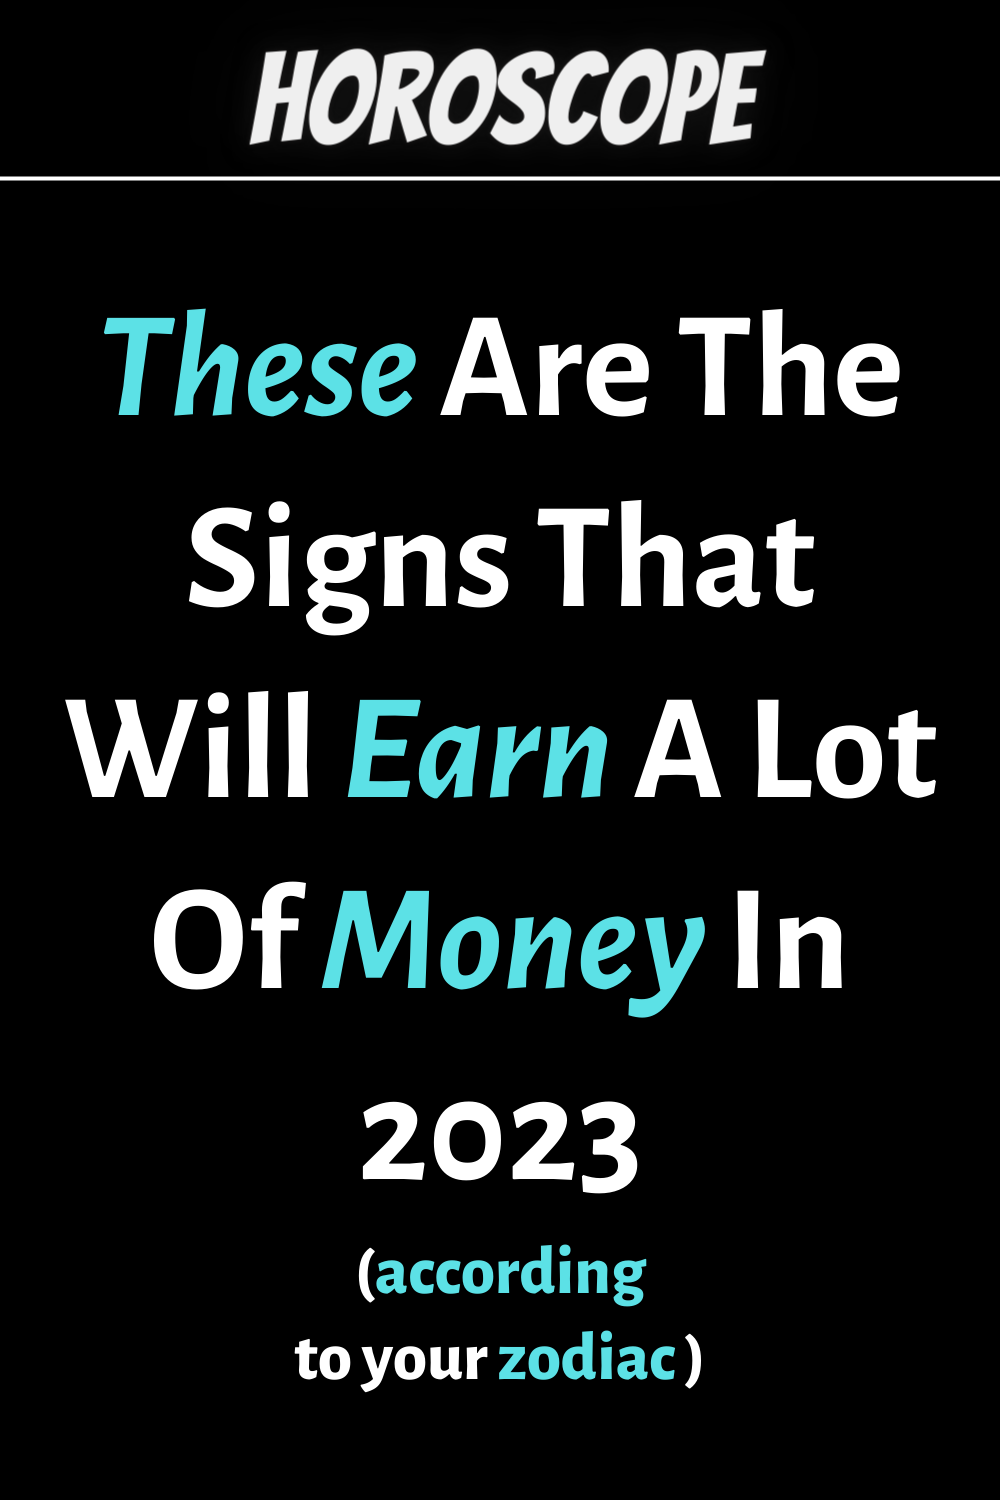 These Are The Signs That Will Earn A Lot Of Money In 2023